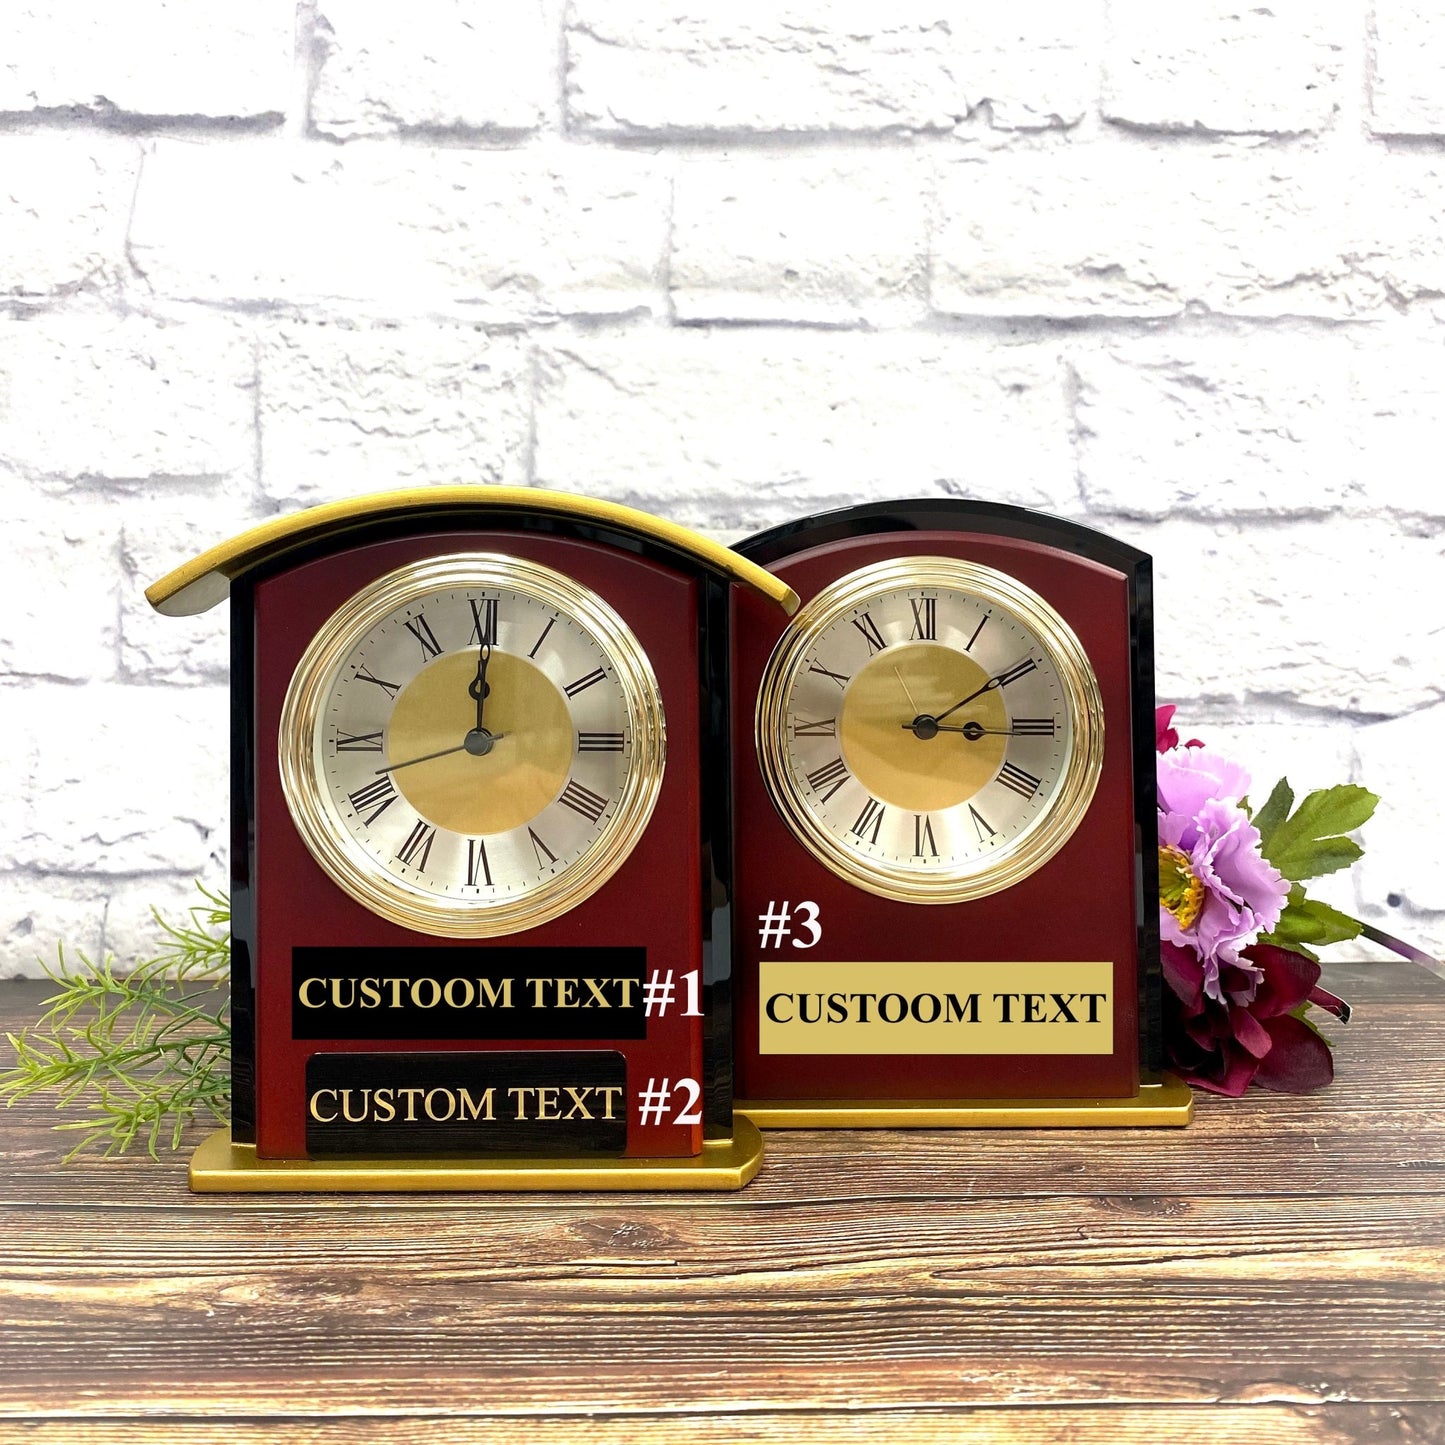 Personalized Desktop Clock Mahogany Finish, Engraved Office Clock Gift for Dad Grandpa